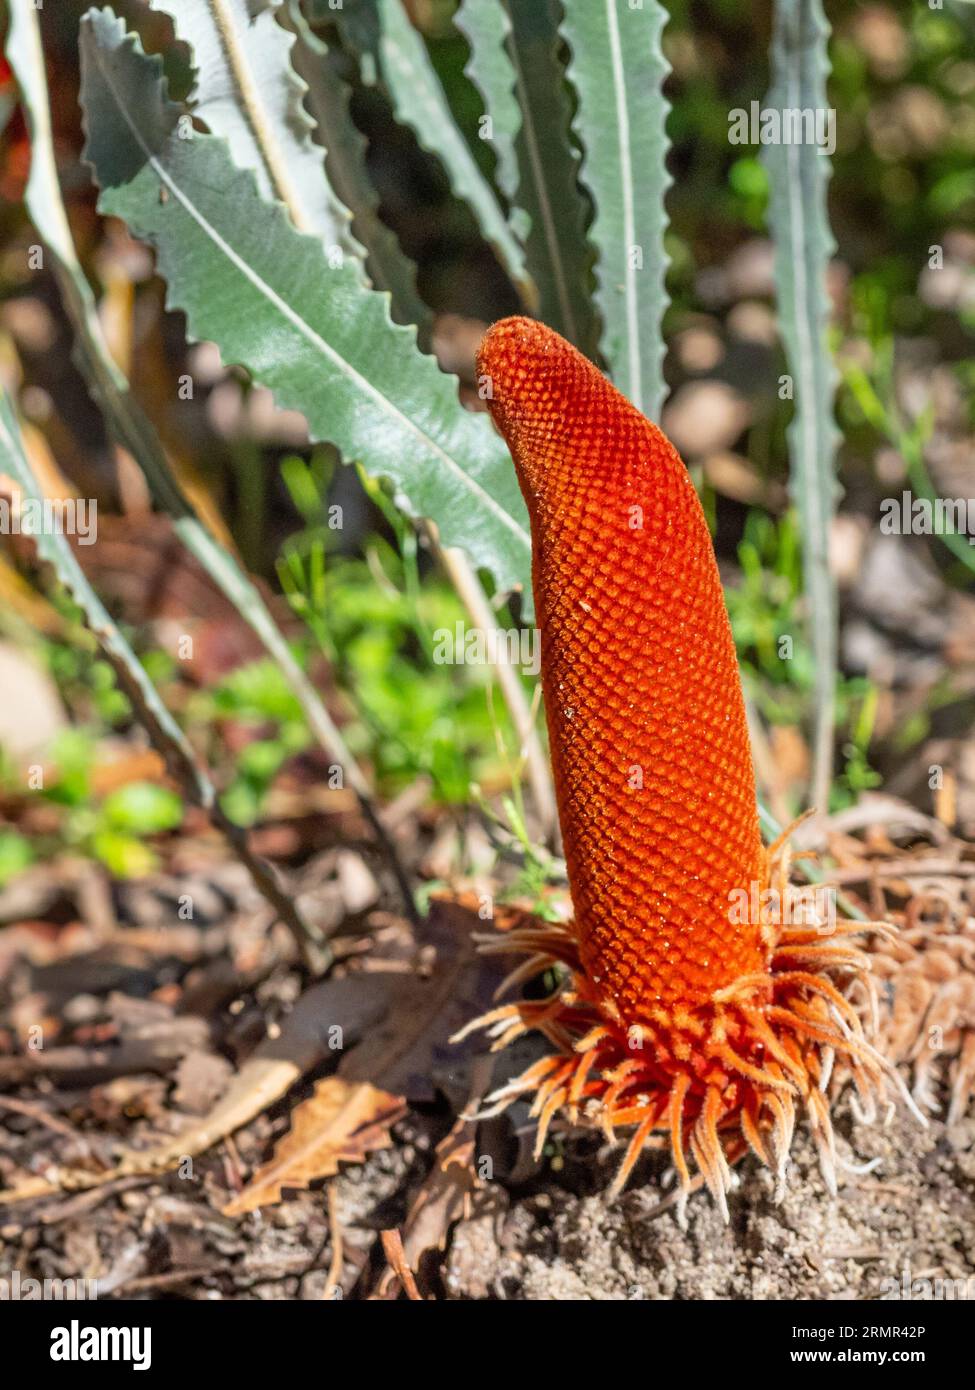 Banksia blechnifolia is a species of flowering plant in the genus Banksia found in Western Australia. Stock Photo